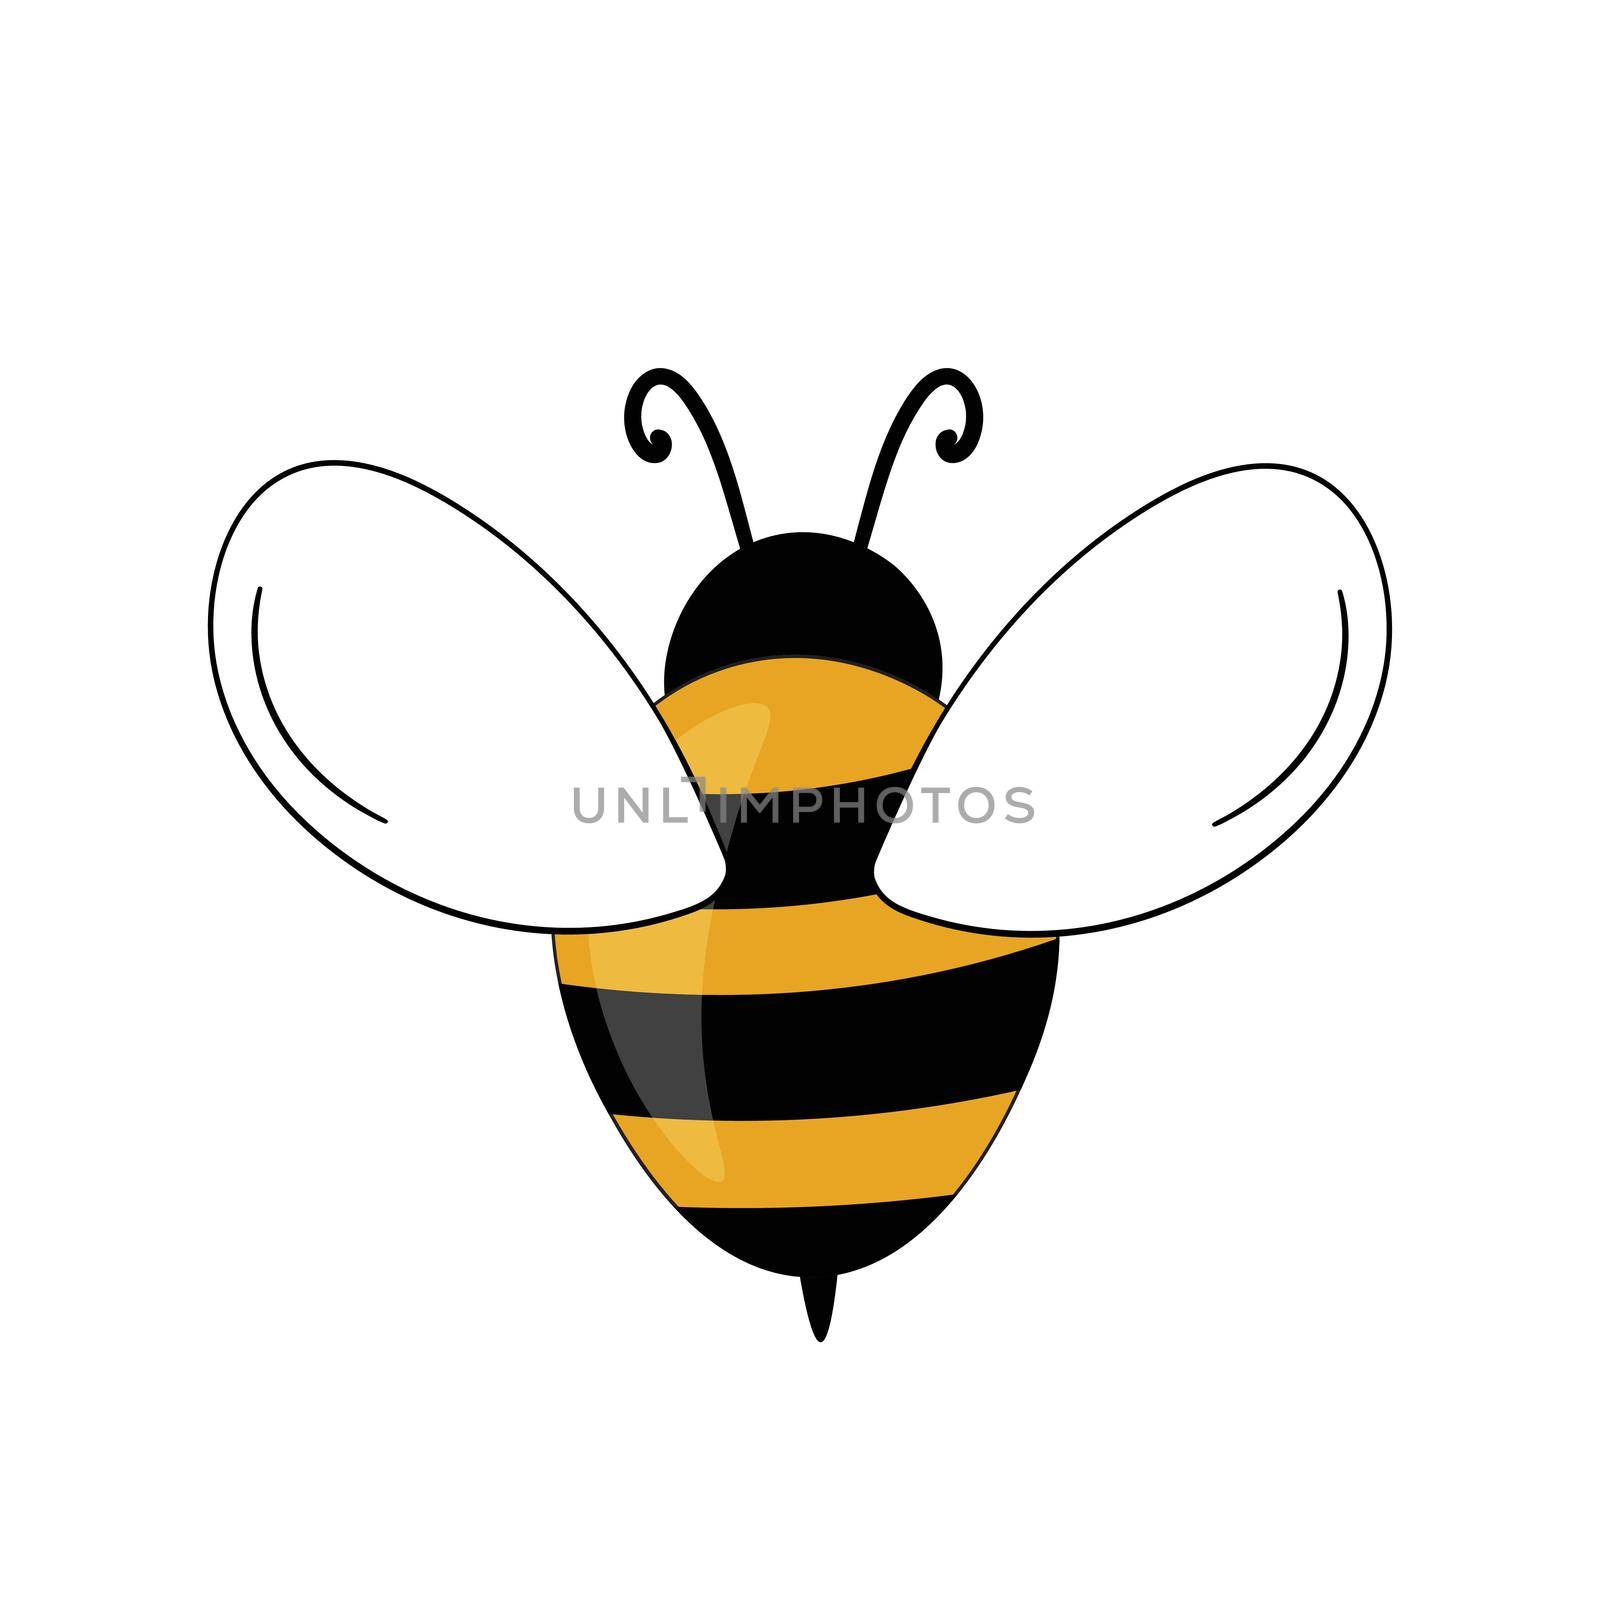 Cartoon bee mascot. A small bees flies. Wasp collection. Vector characters. Incest icon. Template design for invitation, cards. Doodle style.